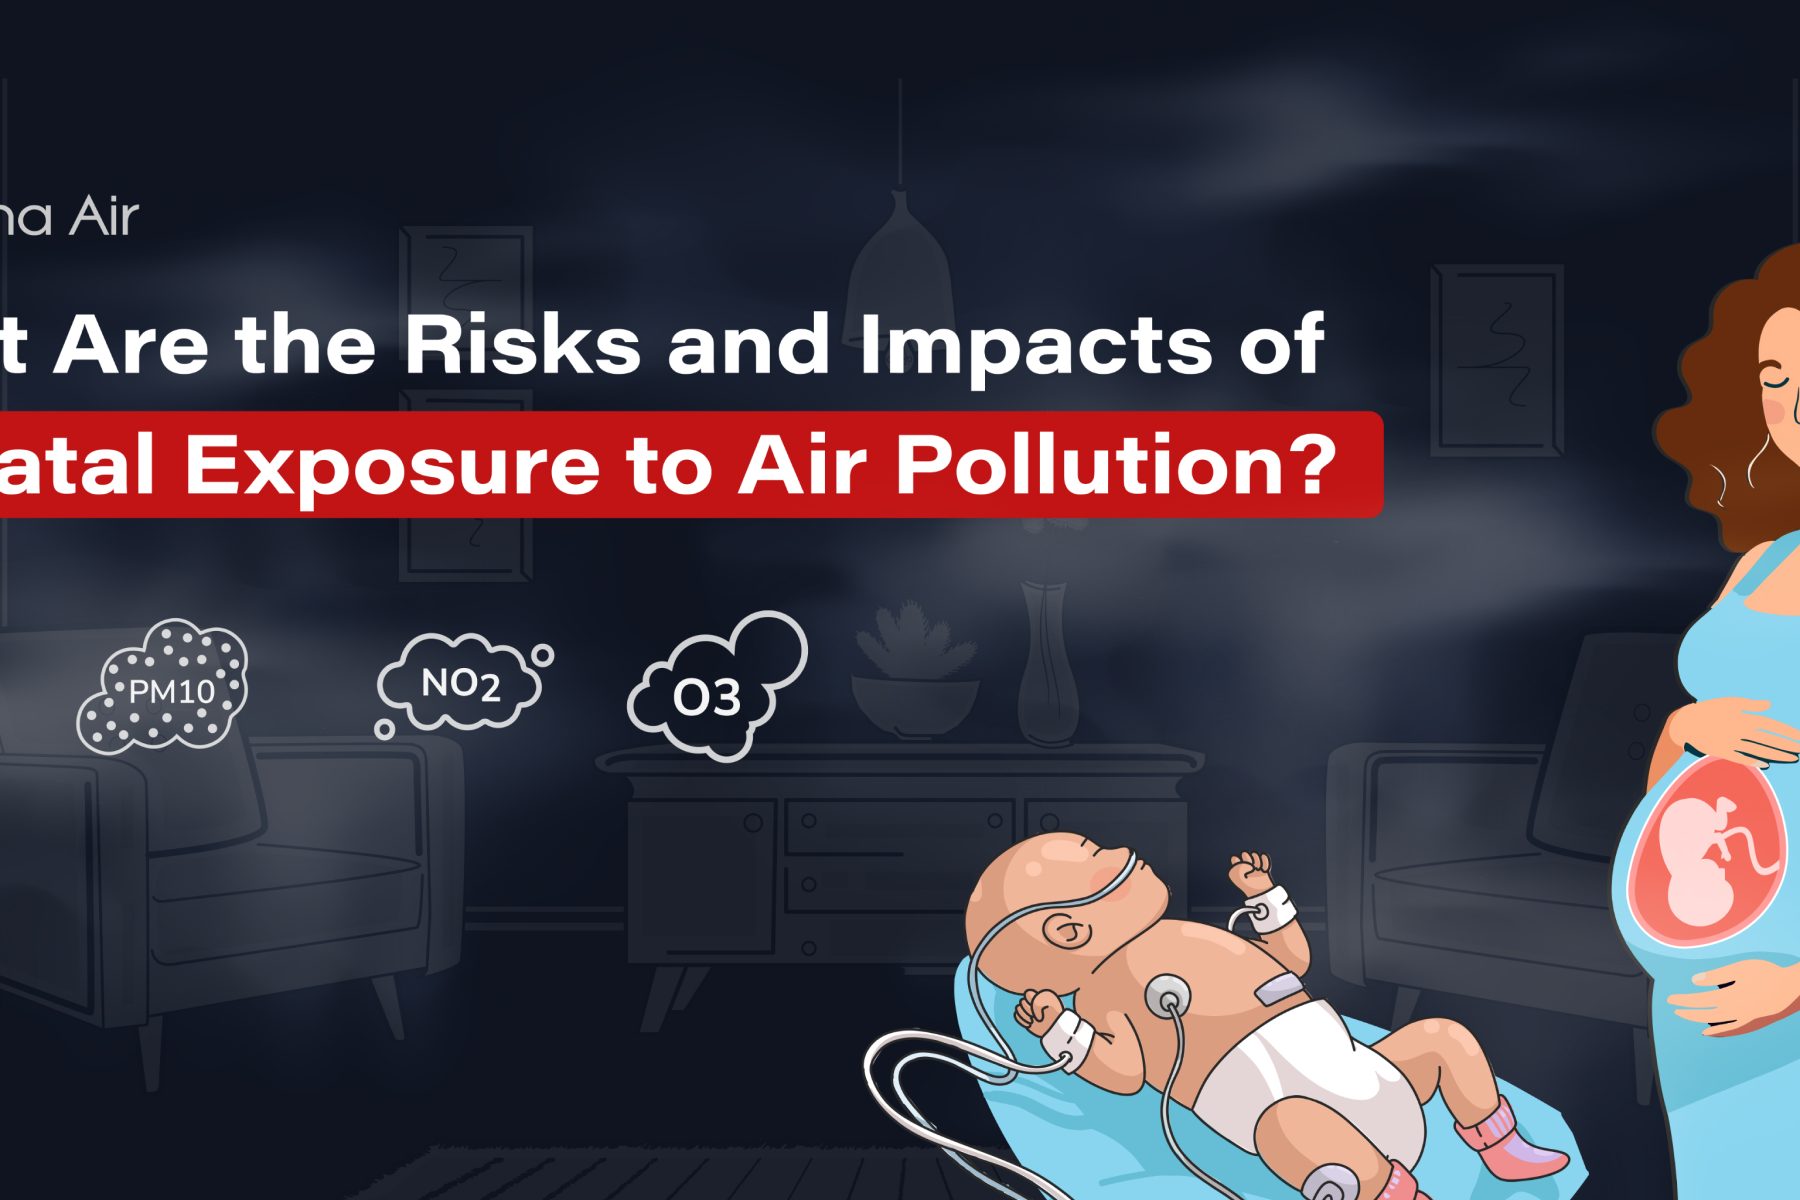 Risks and impacts of prenatal exposure to air pollution